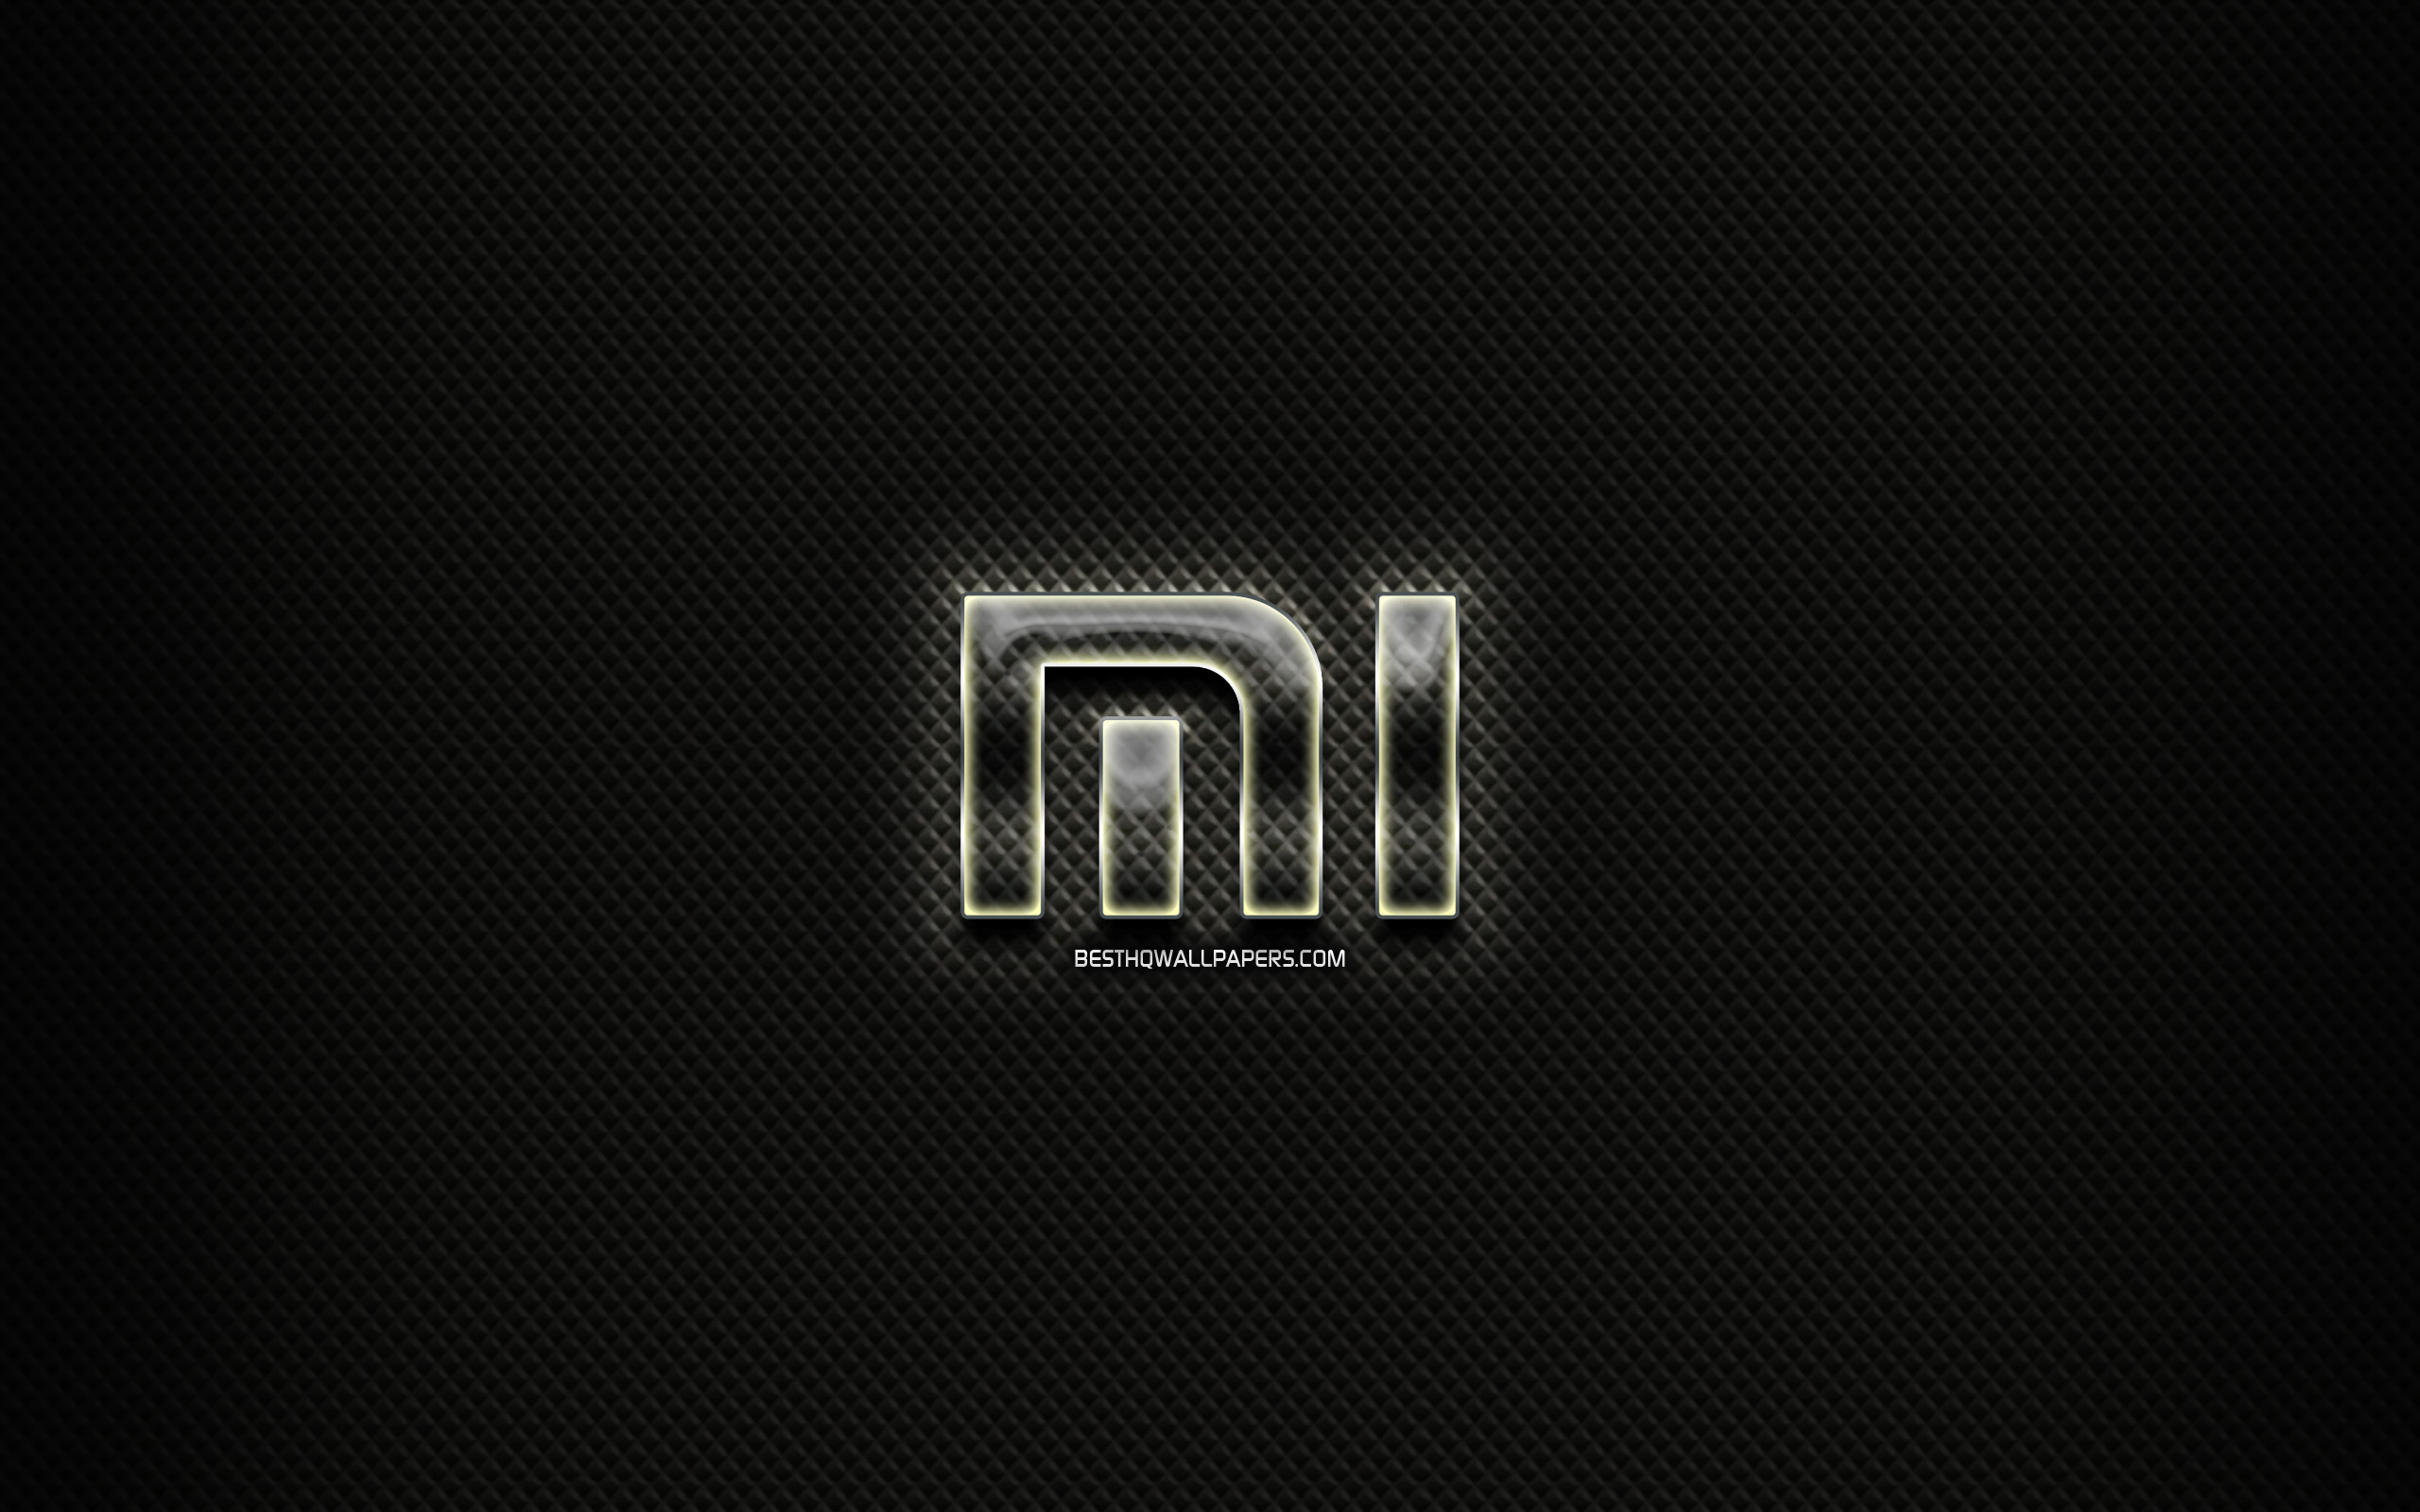 Download Wallpapers Xiaomi Glass Logo Black Background Artwork Brands Xiaomi Logo Creative Xiaomi For Desktop With Resolution 2560x1600 High Quality Hd Pictures Wallpapers